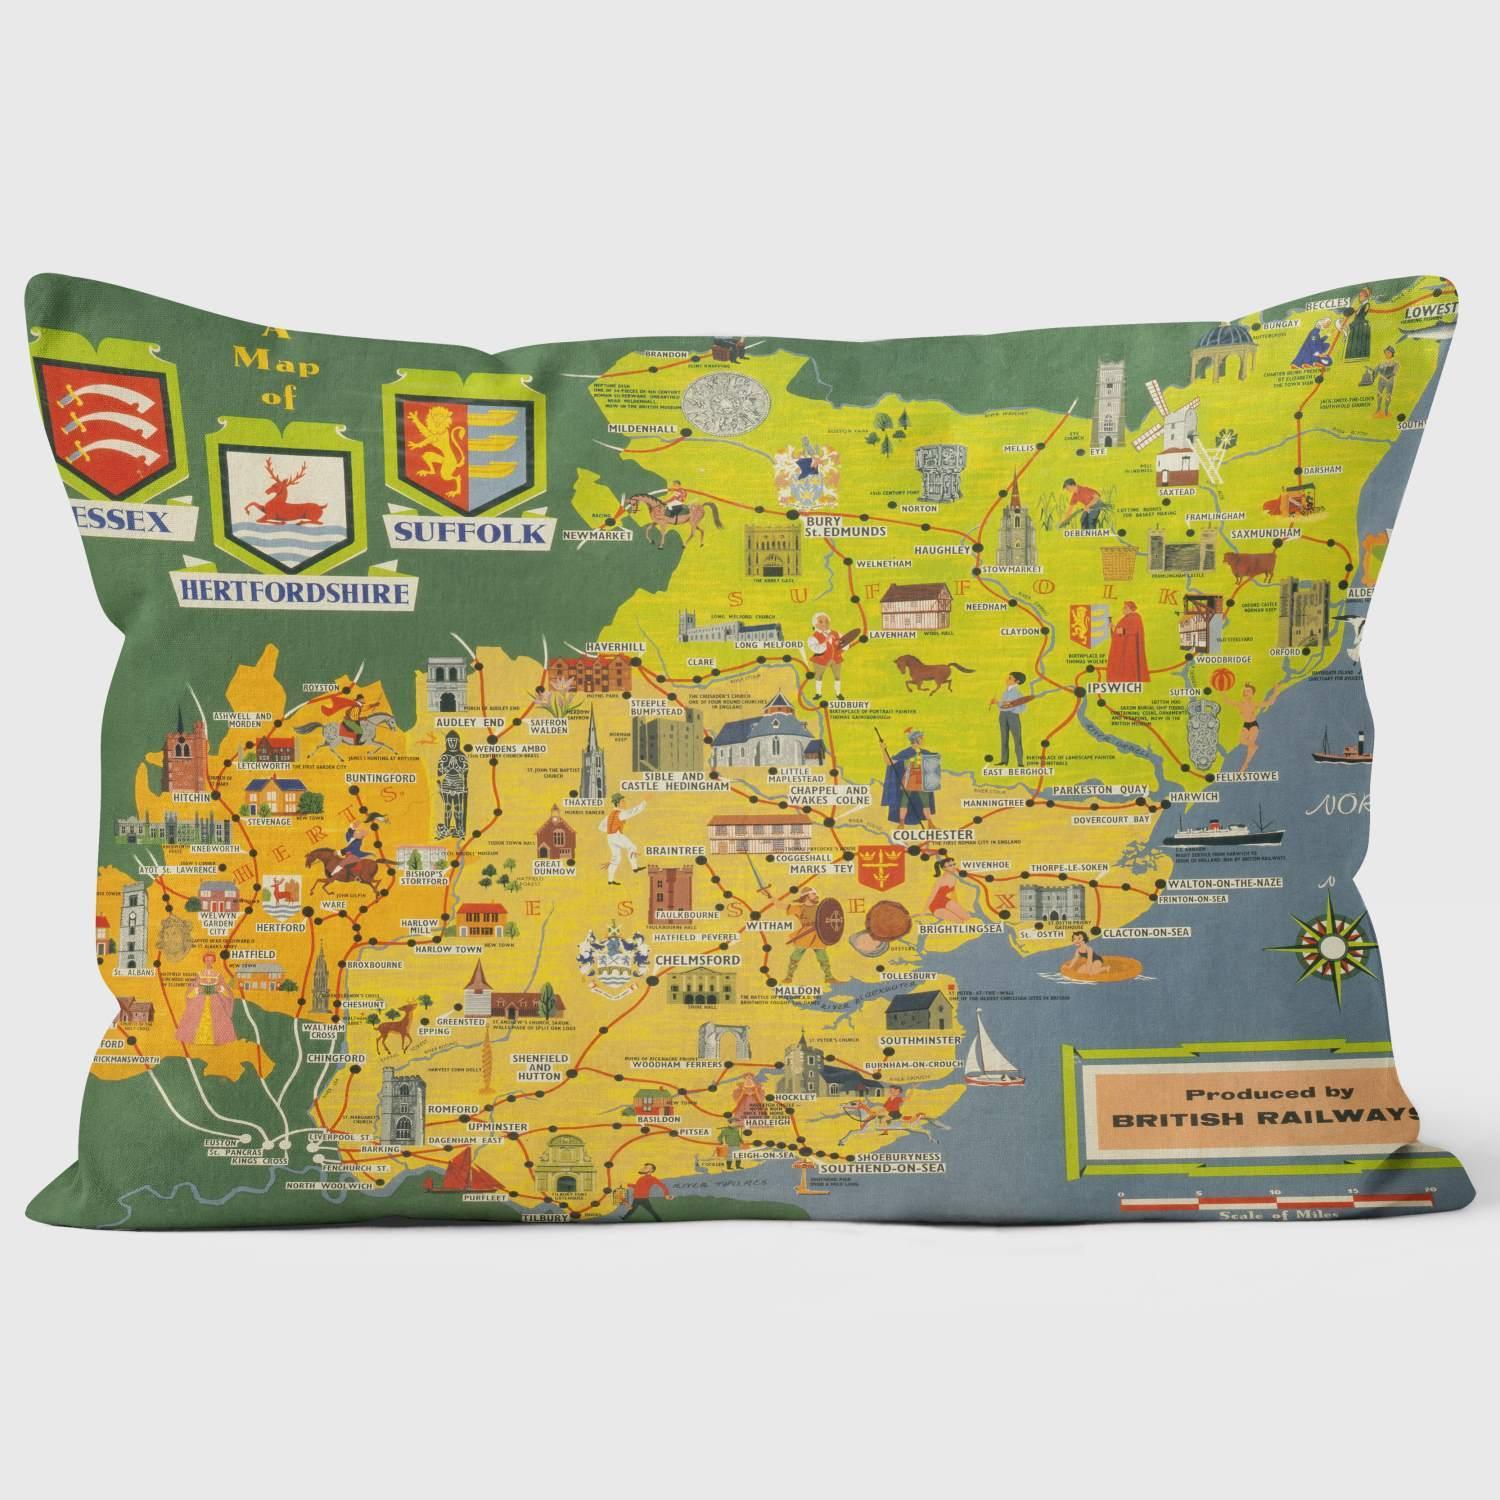 A Map Of Essex Suffolk And Hertfordshire BR (ER) 1950s - National Railway Museum Cushion - Handmade Cushions UK - WeLoveCushions